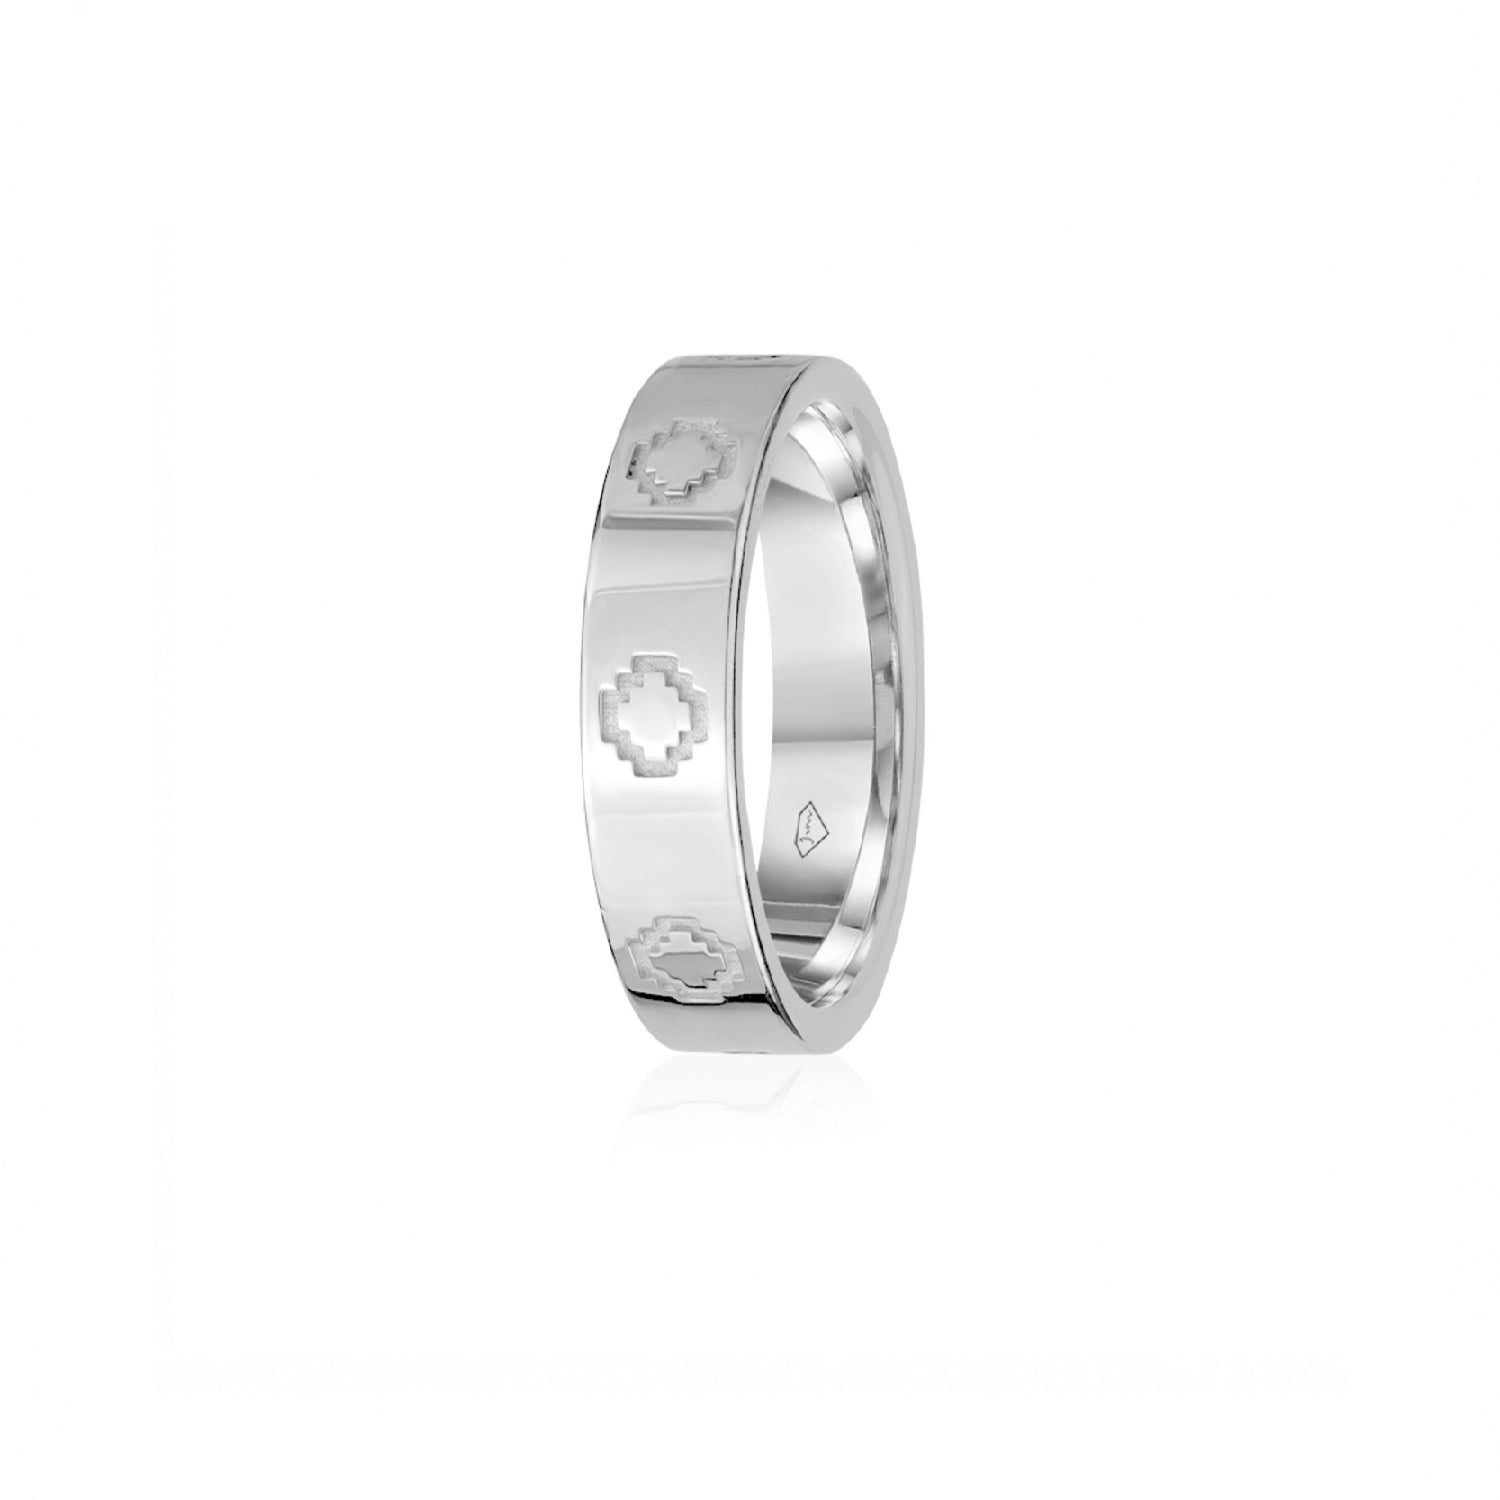 Step Motif Polished Finish Square Edge 6-7 mm Wedding Band in White Gold